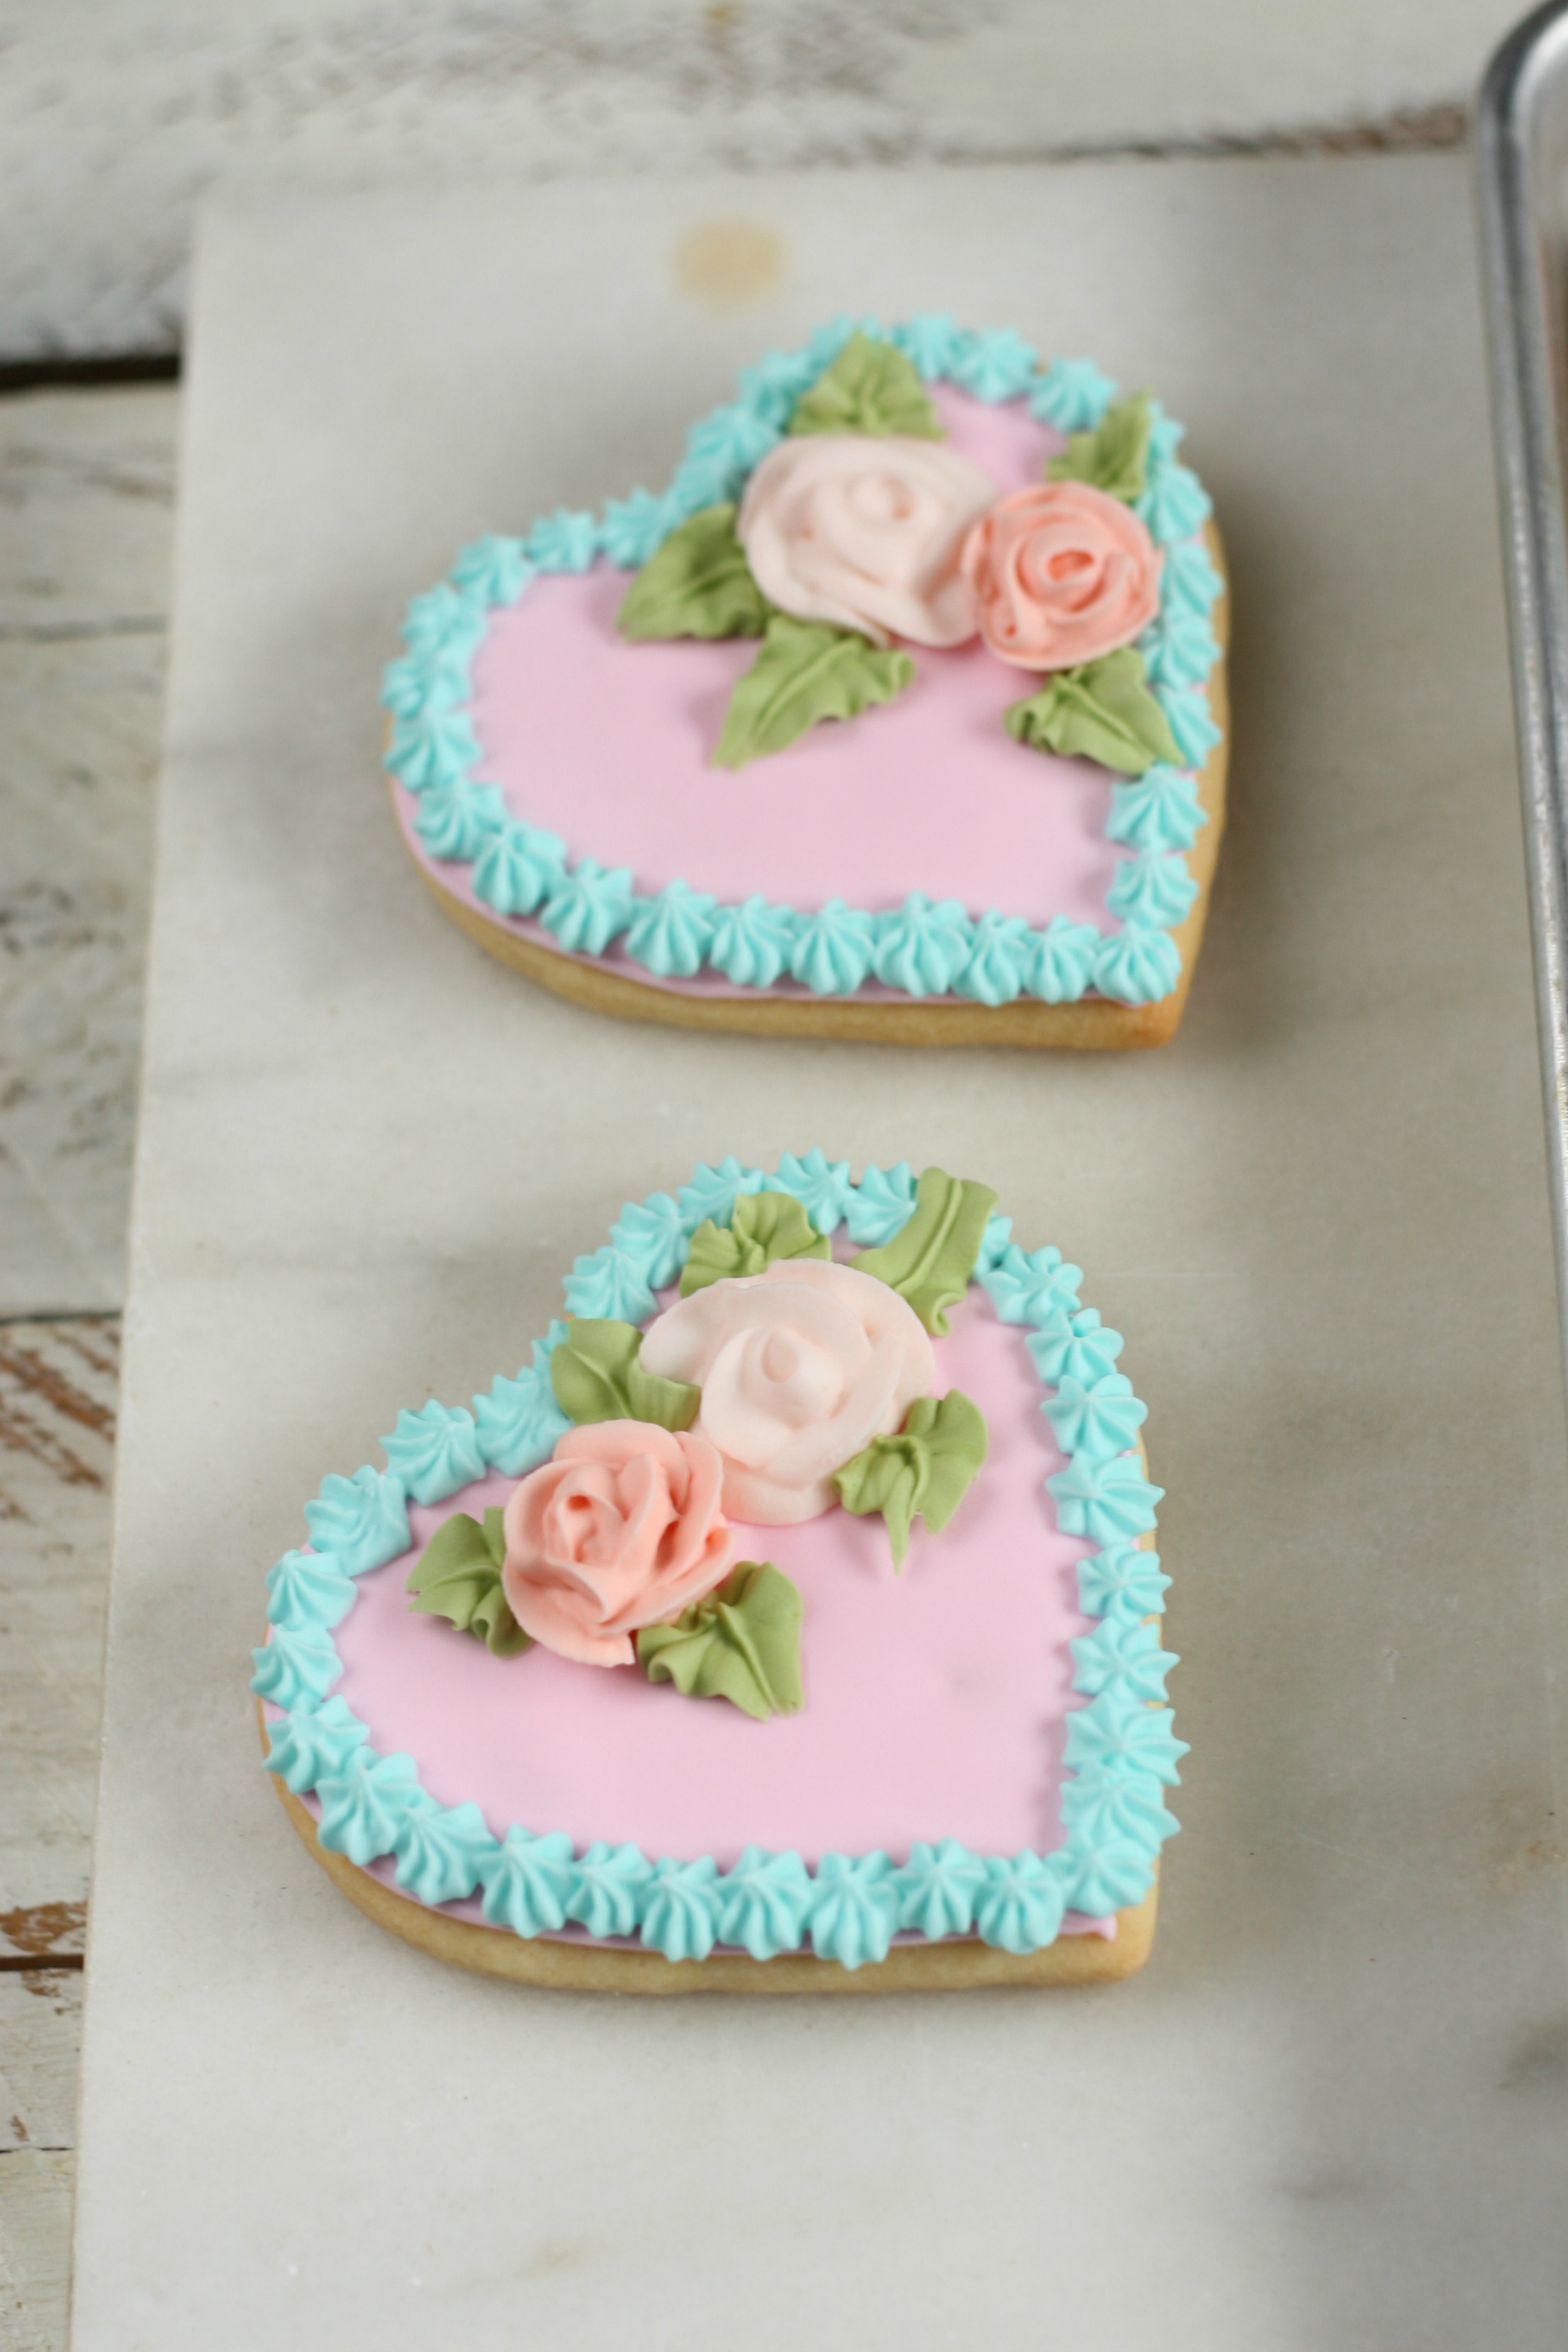 Heart sugar cookies with pale pink royal icing and sugar roses